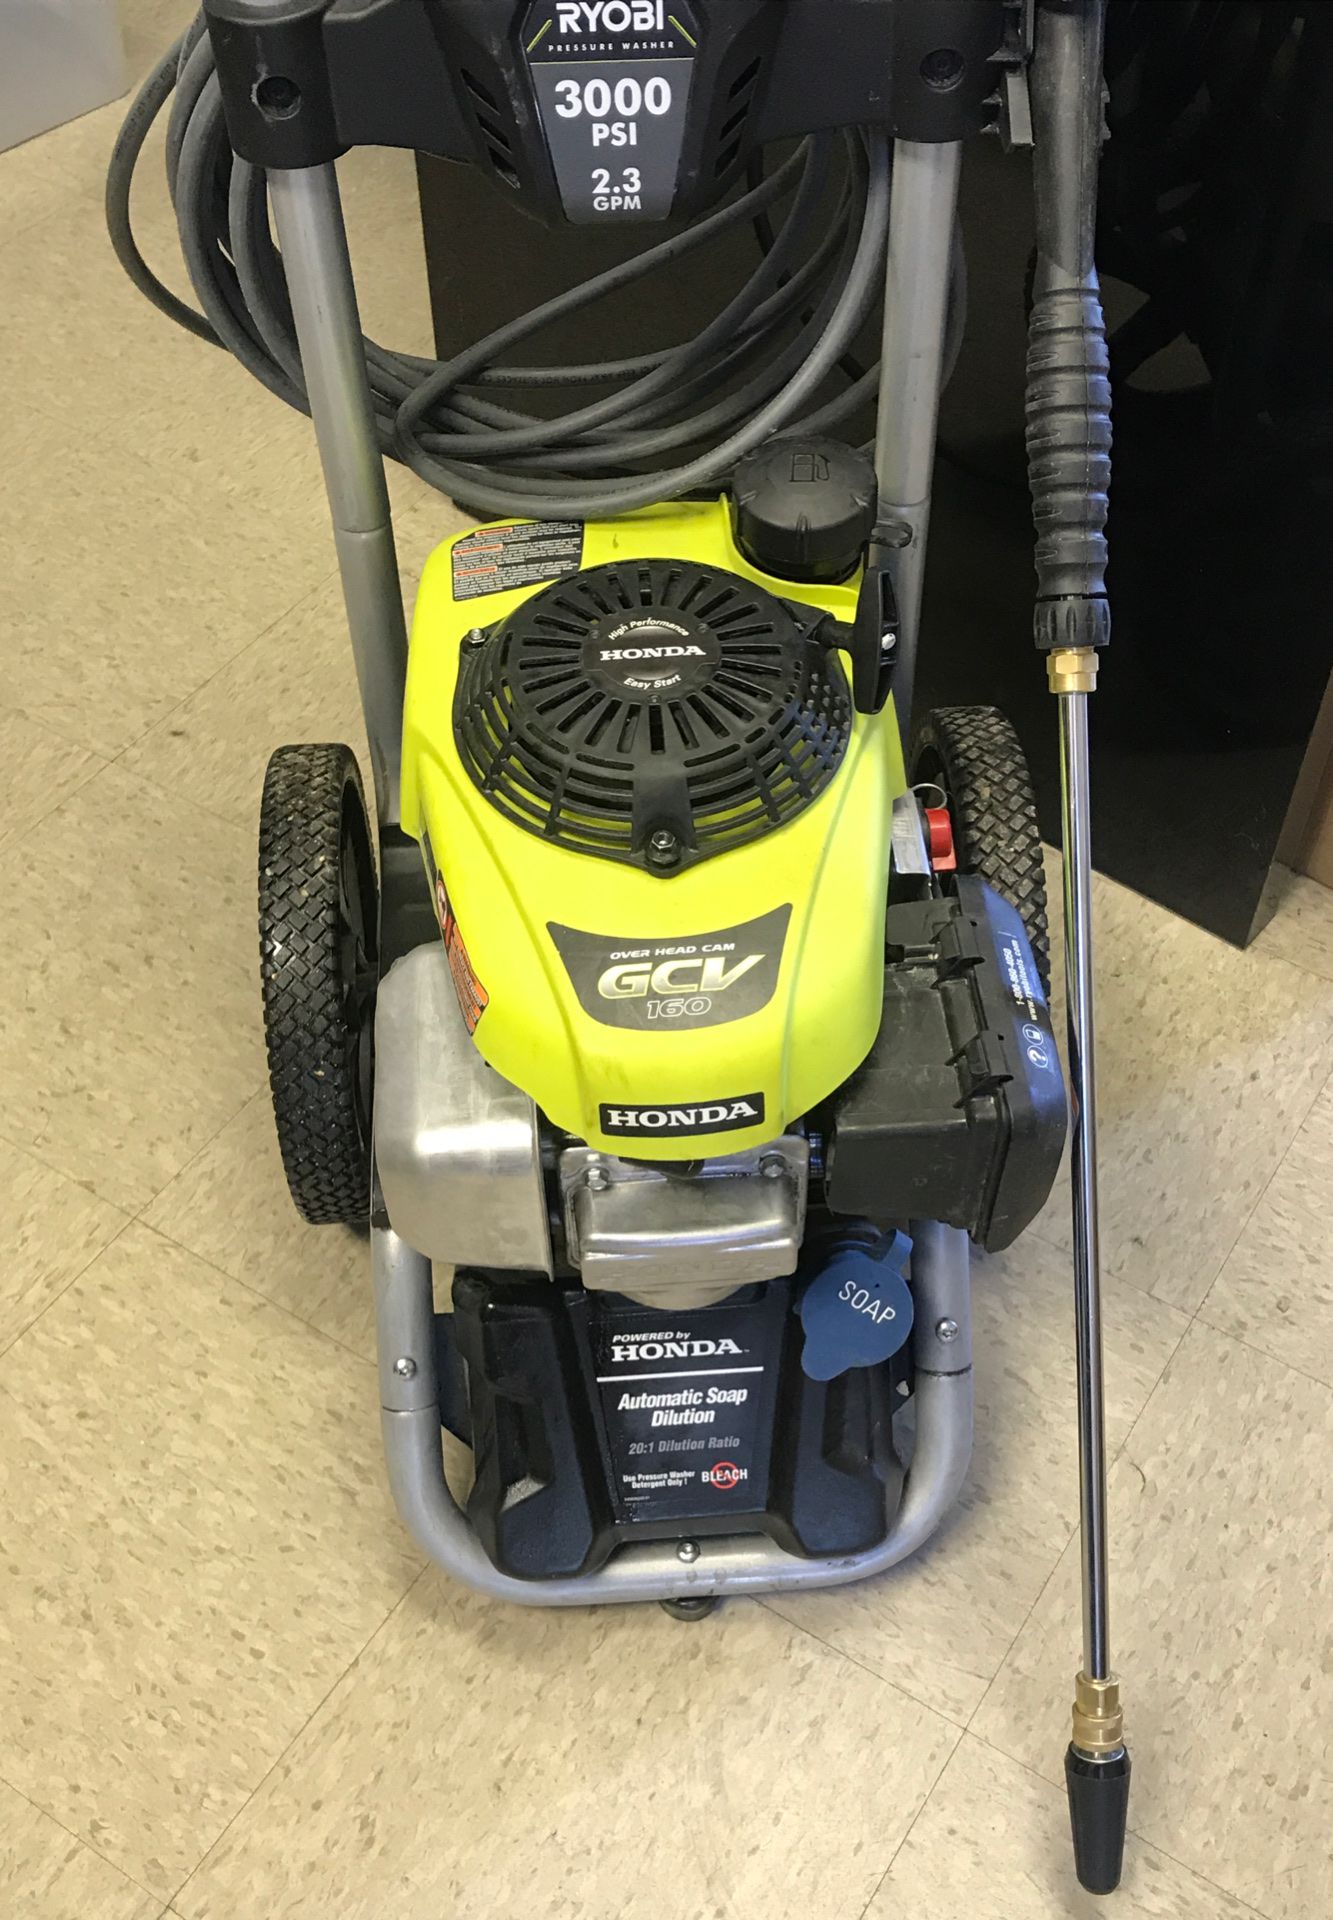 RYOBI Gas Pressure Washer 3000 PSI 2.3 GPM Quick Release Handle Cold Water